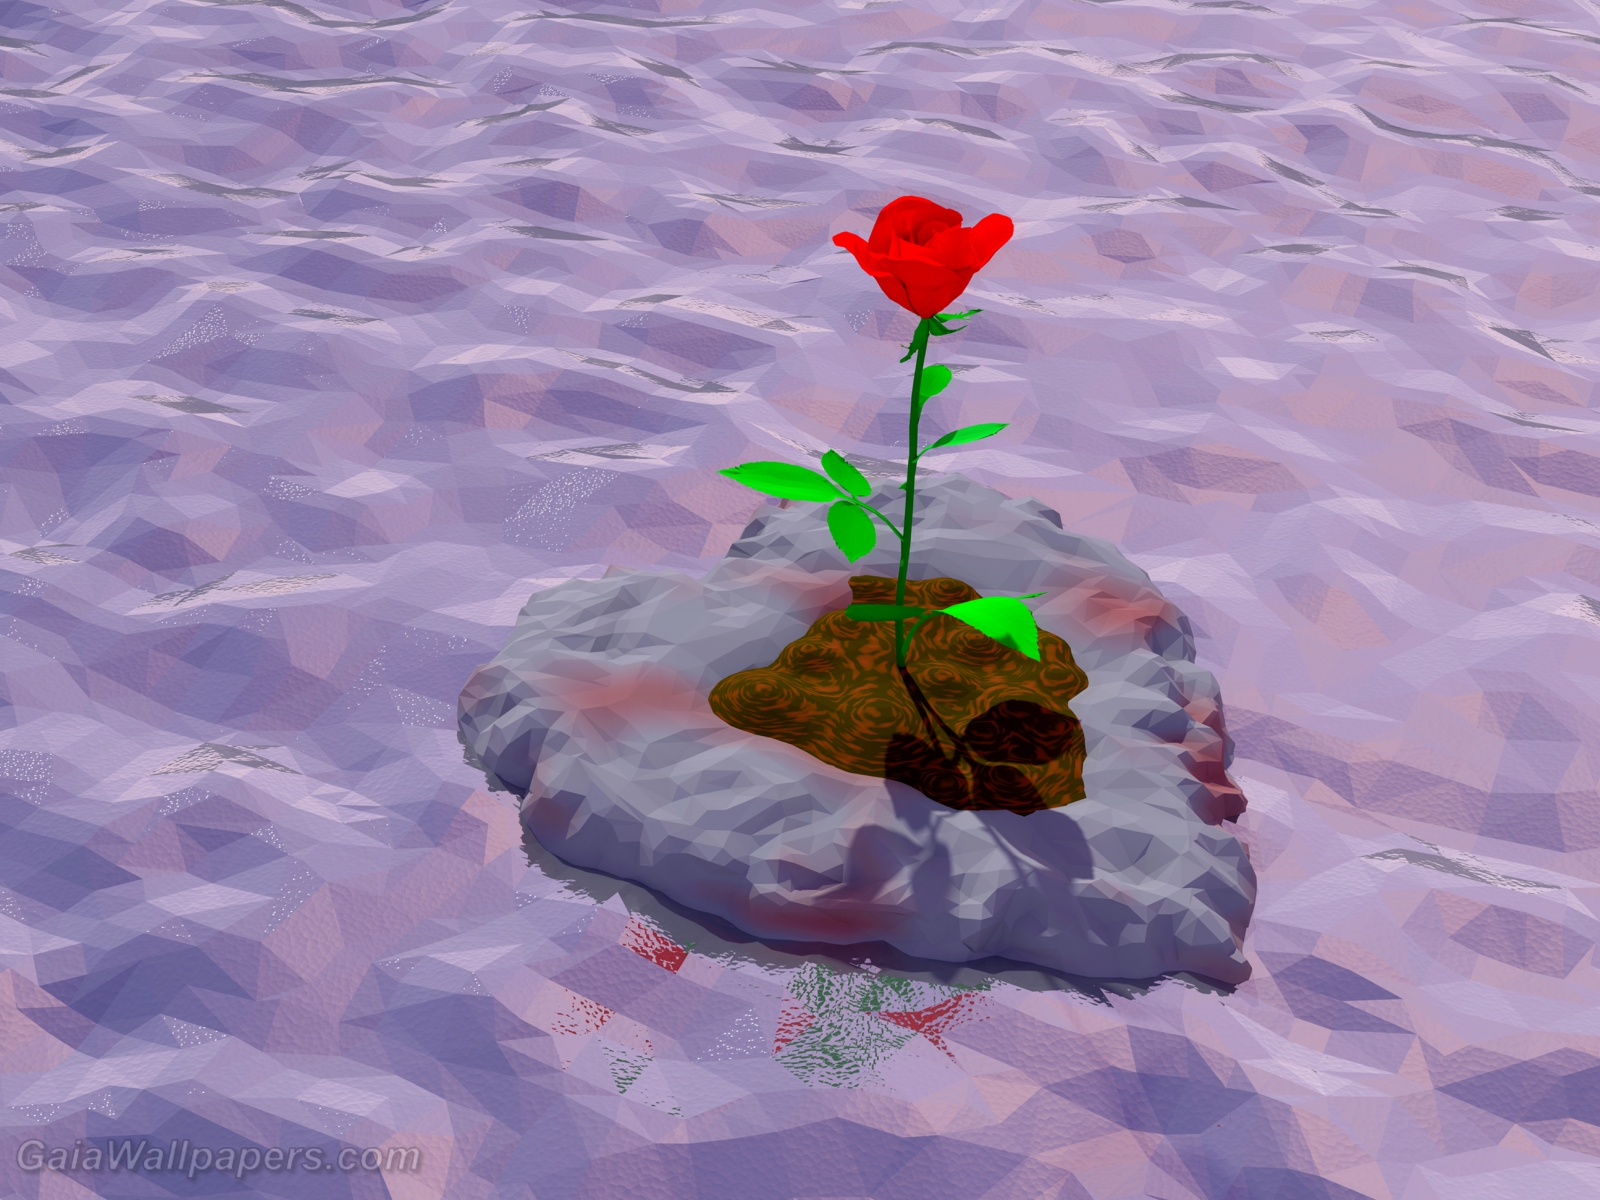 Rose of love drifting on the sea - Free desktop wallpapers